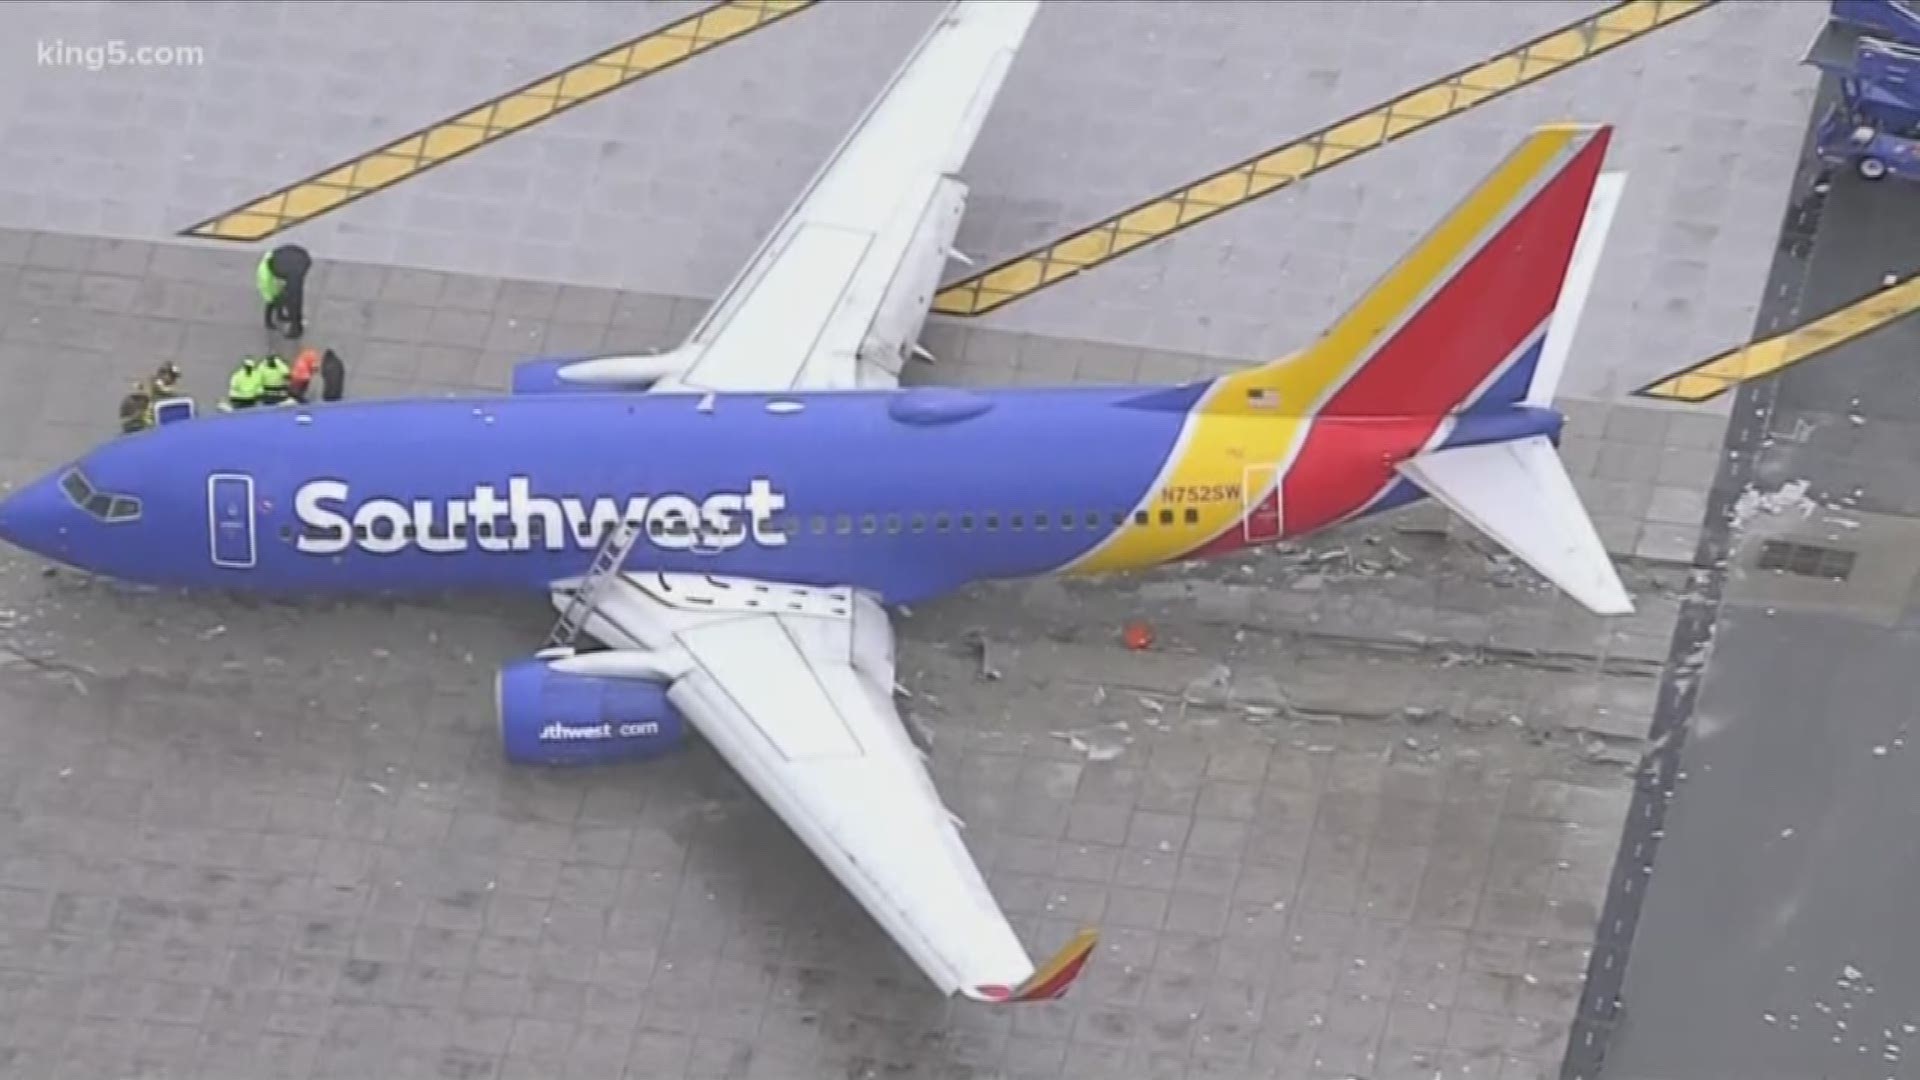 Southwest Airlines confirmed that there were no injuries among the 112 passengers and five crew members.